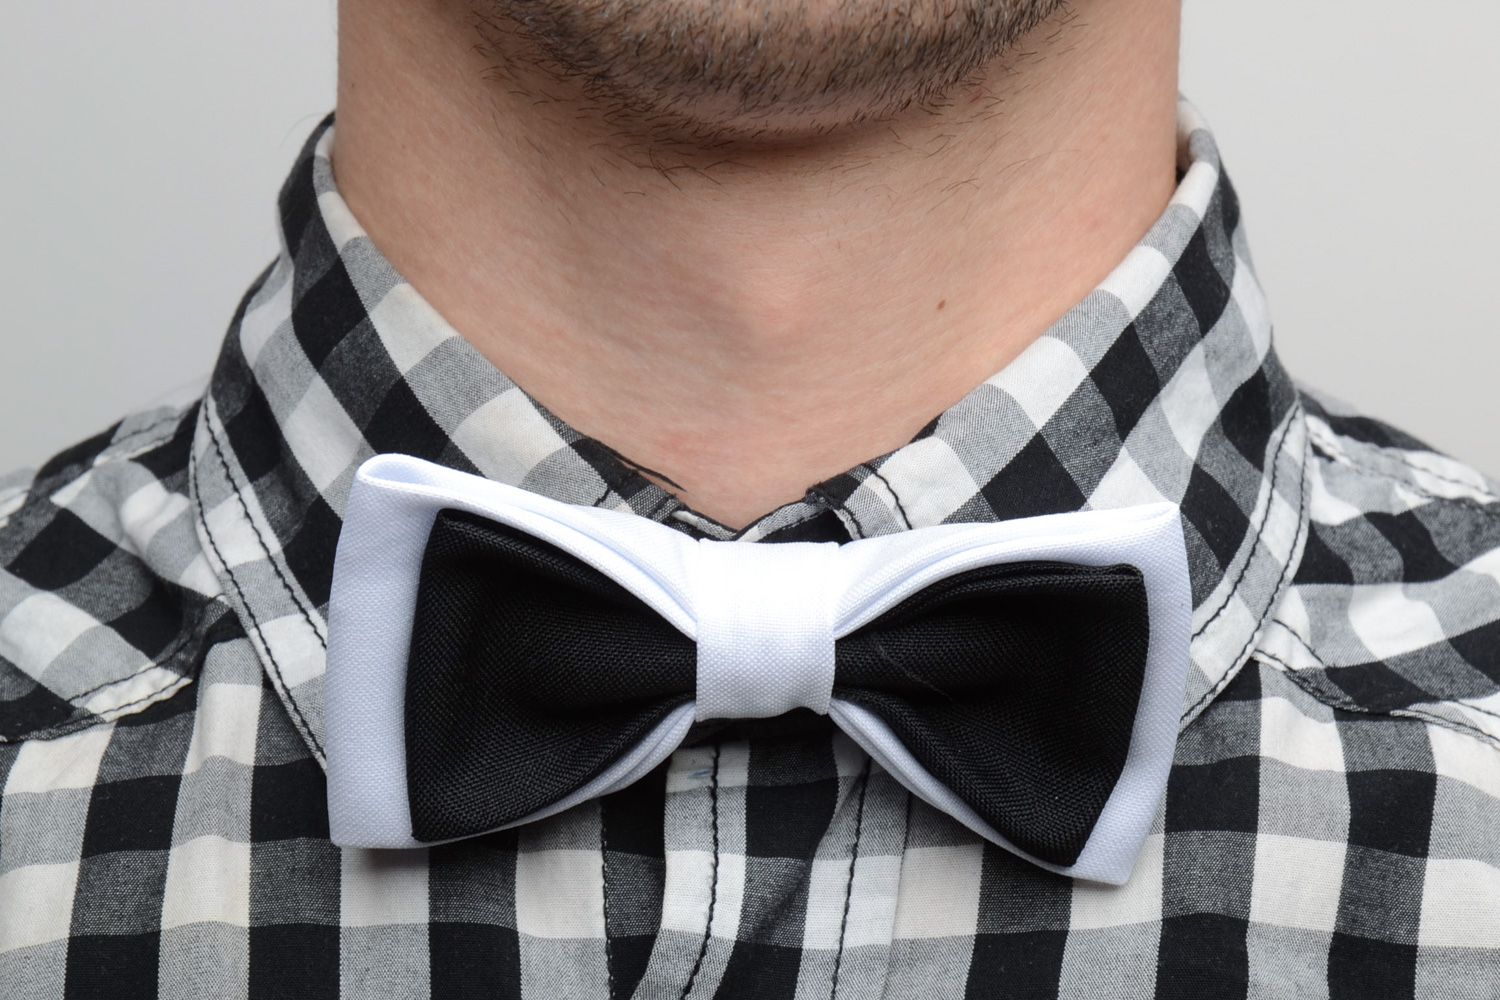 Handmade contrast black and white bow tie sewn of costume fabric for men photo 1